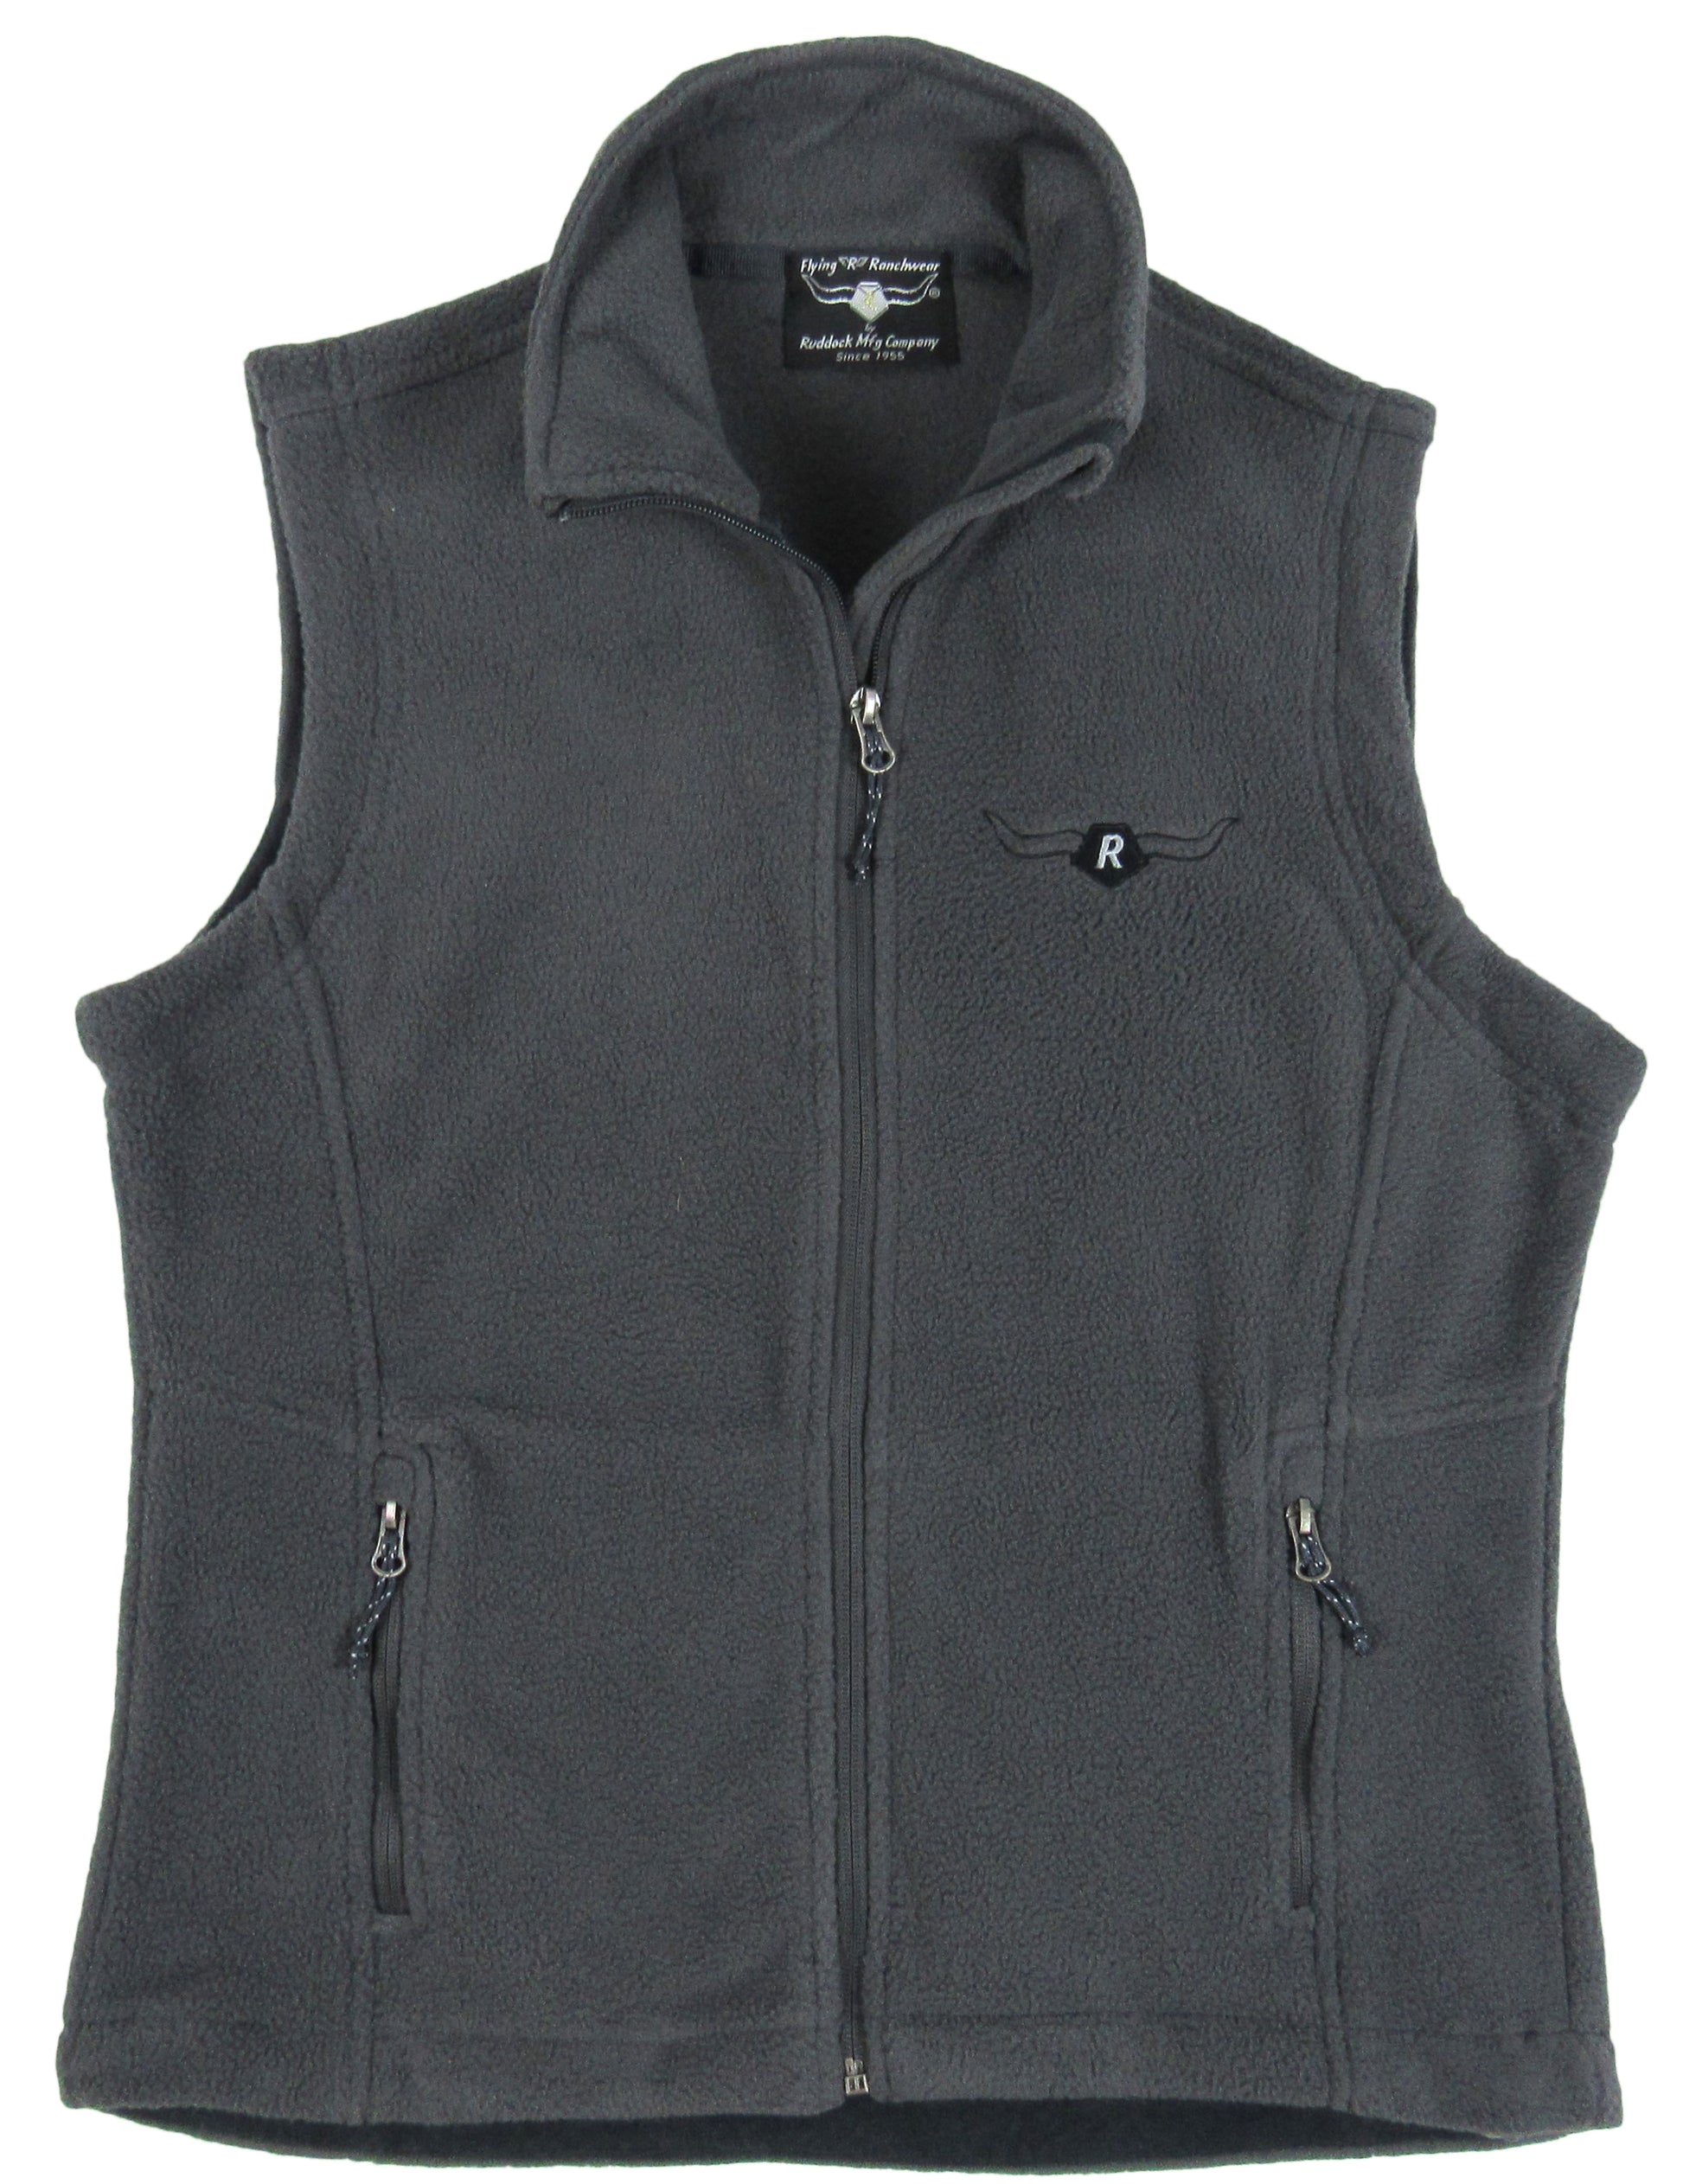 canyon fleece vest with zipper for ladies in graphite gray color